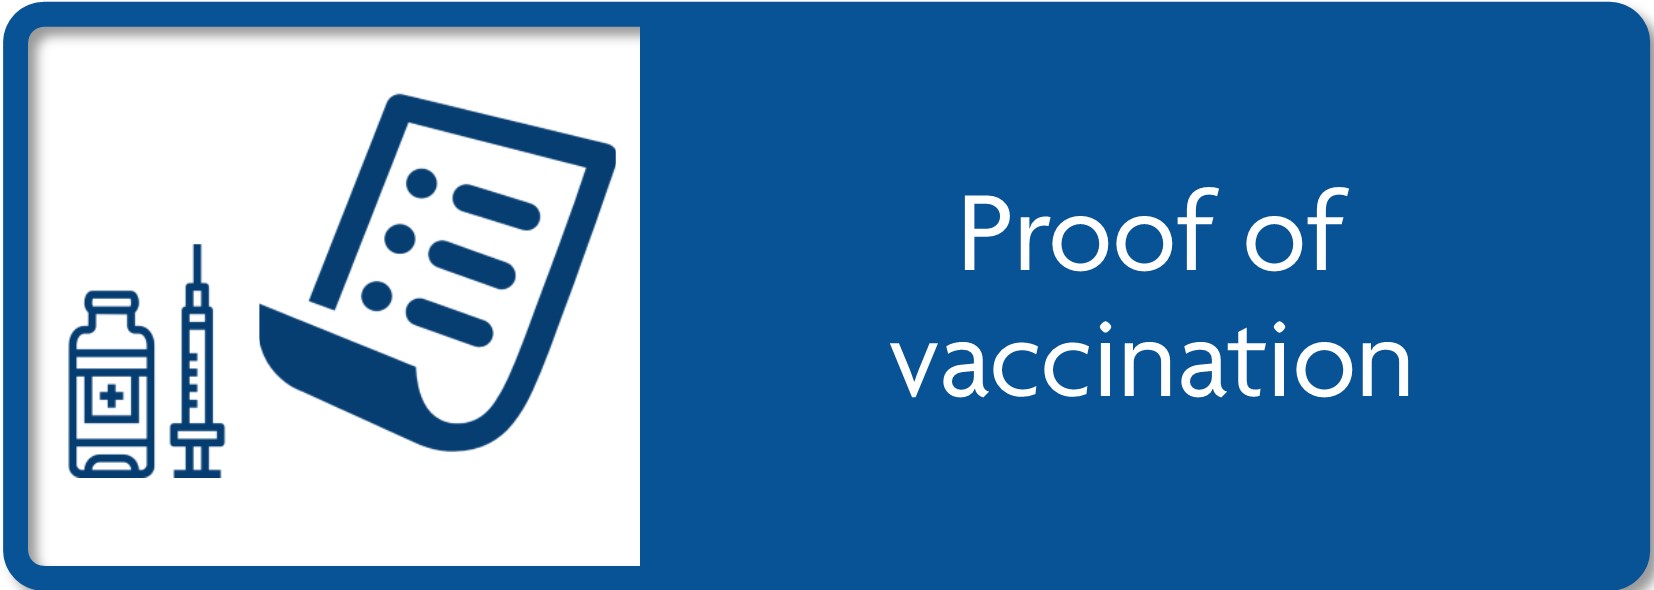 Proof of vaccination